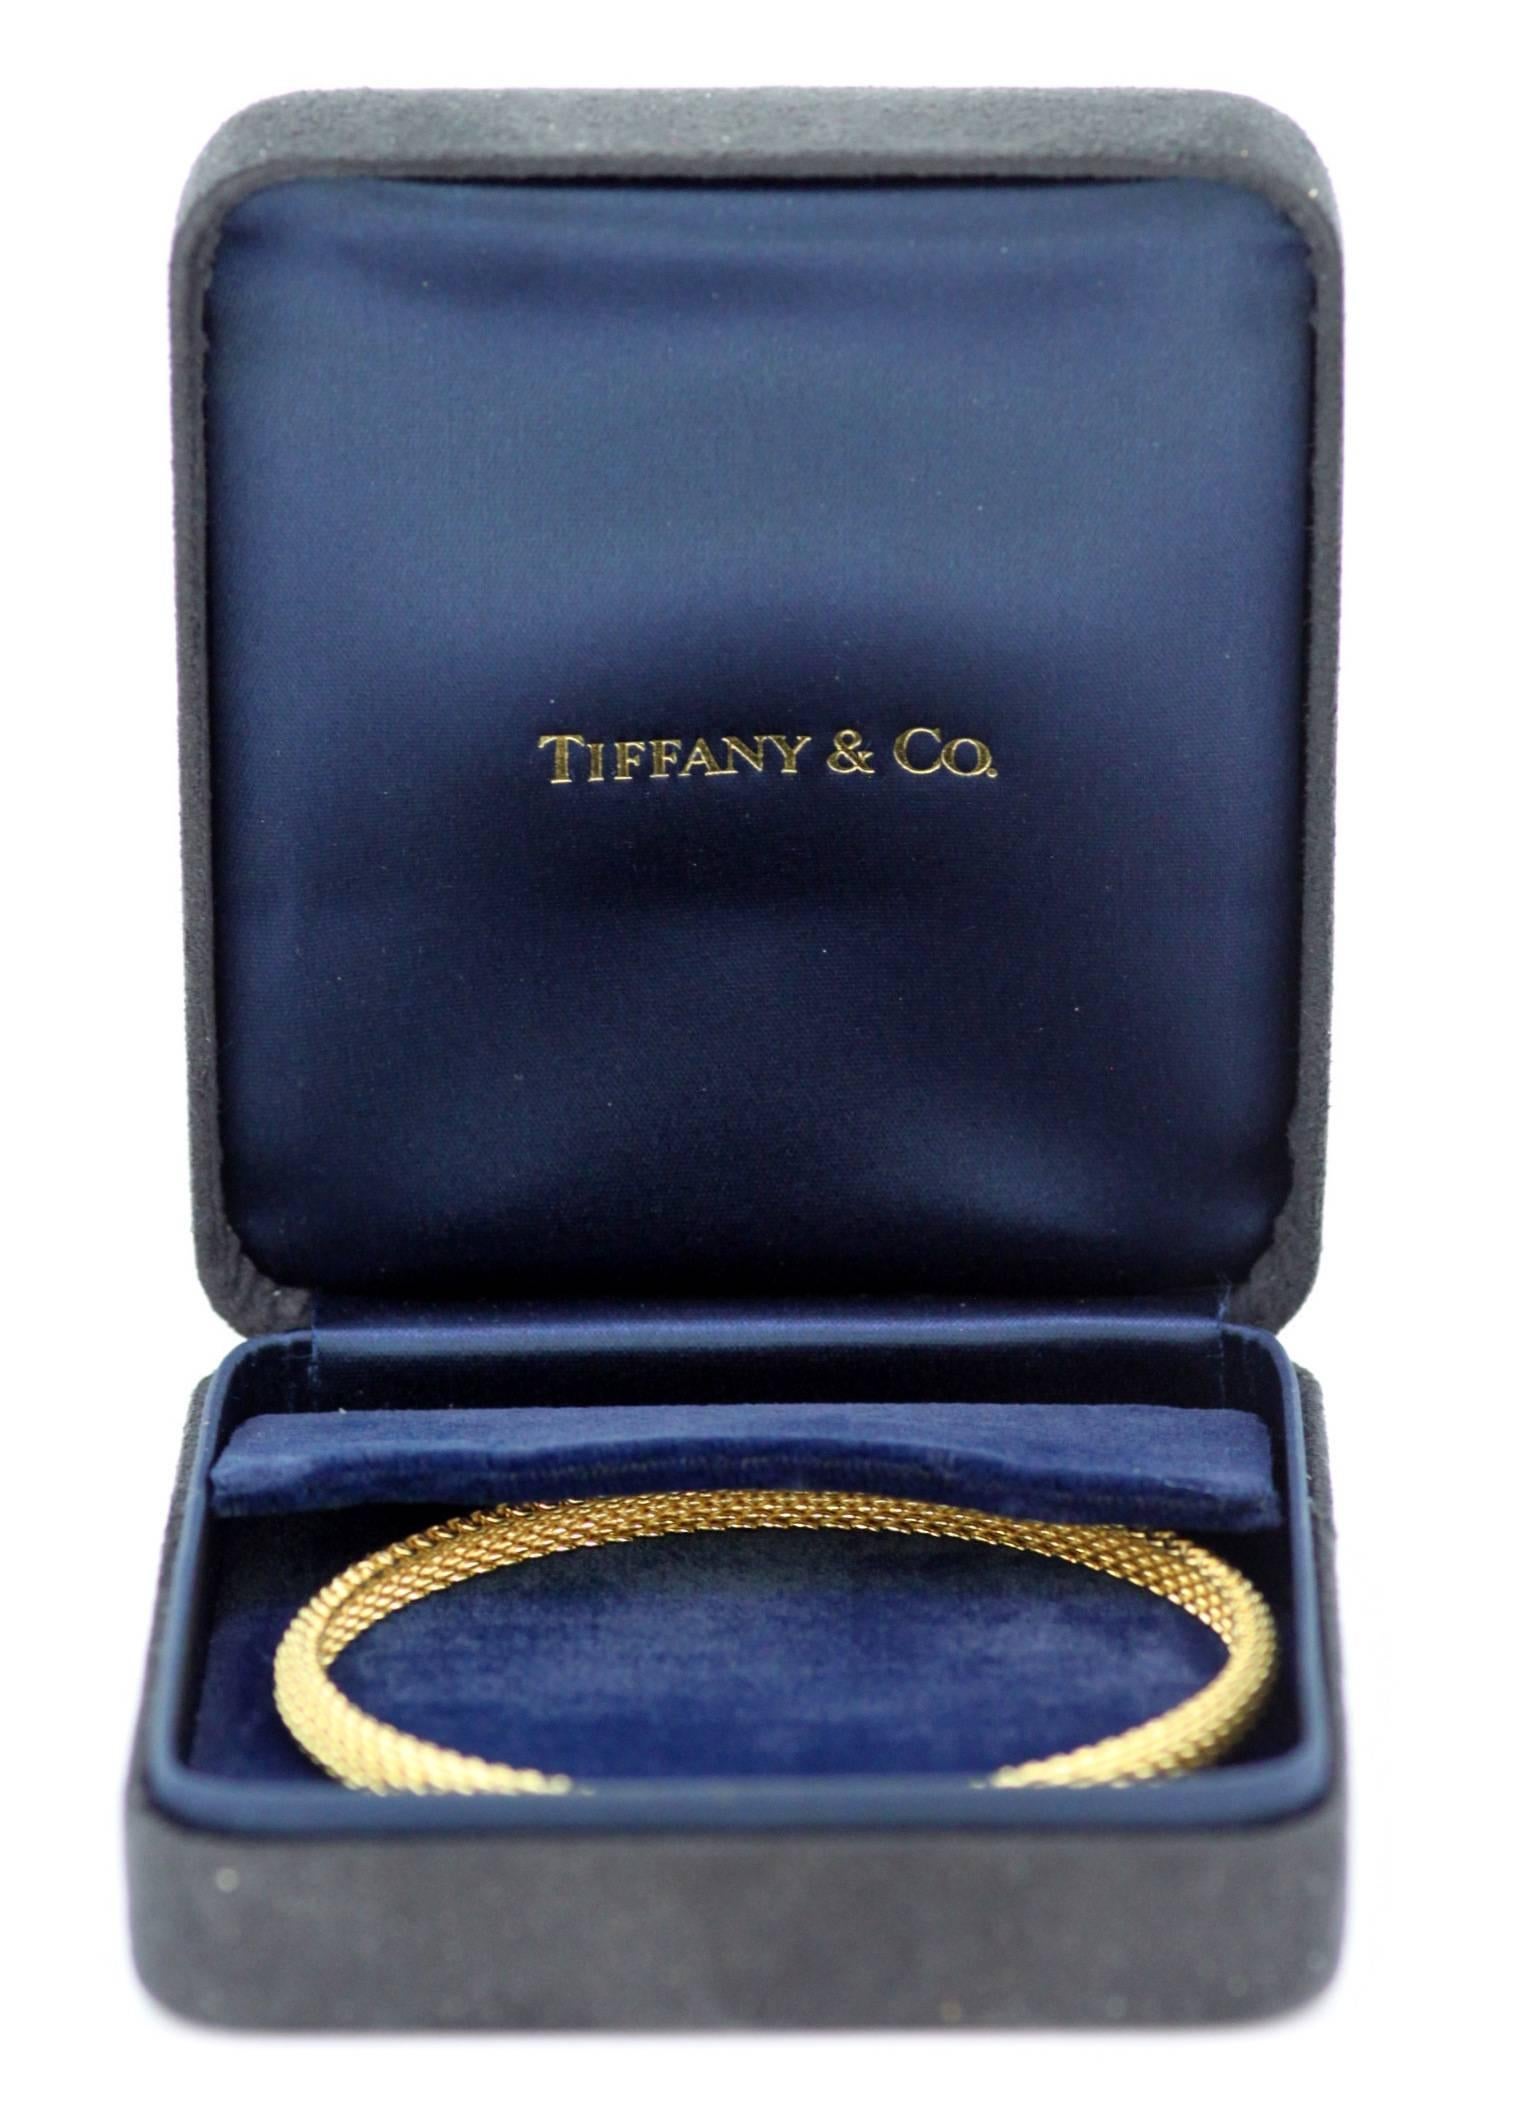 Vintage 18K Yellow Gold Ladies Bangle 
Designer : Tiffany & Co 
C.2000 
Fully hallmarked. 

Dimensions - 
Diameter x Width : 7 x 0.55 cm 
Weight : 20 grams 

Condition : Minor wear and tear, general signs of usage overall excellent and pleasant